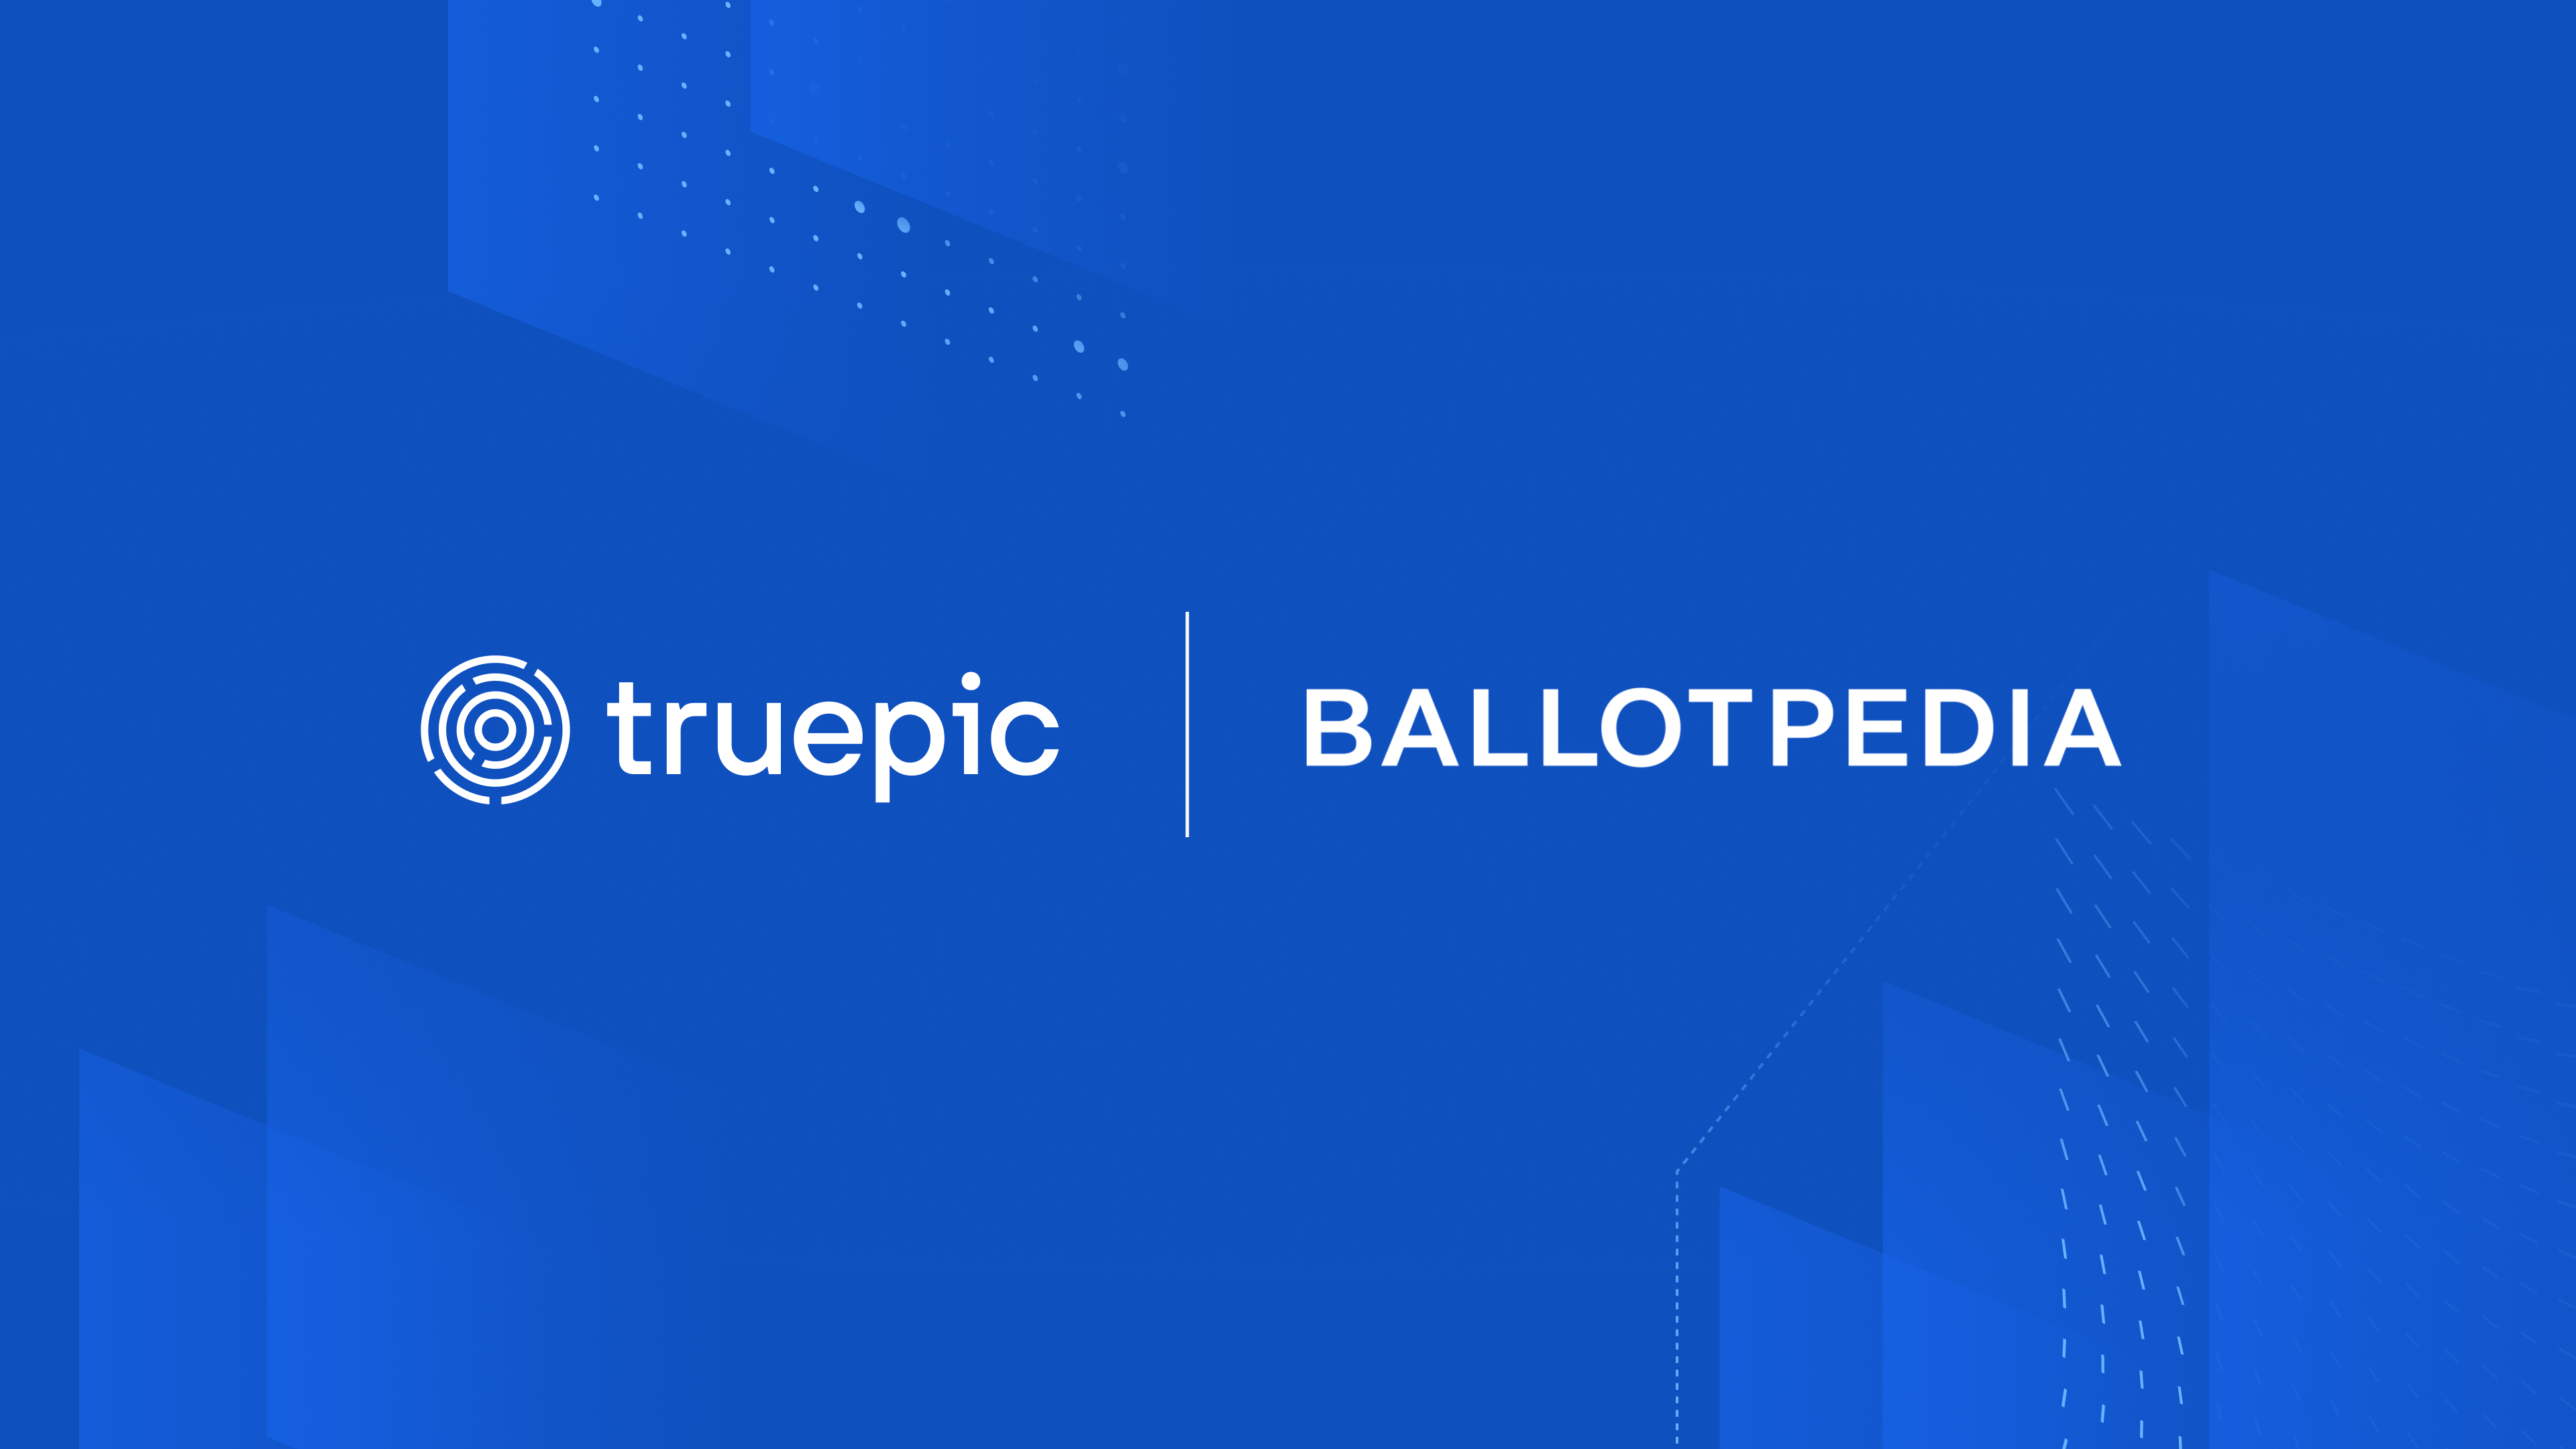 Ballotpedia and Truepic Partner to Verify U.S. Political Candidate Identities 